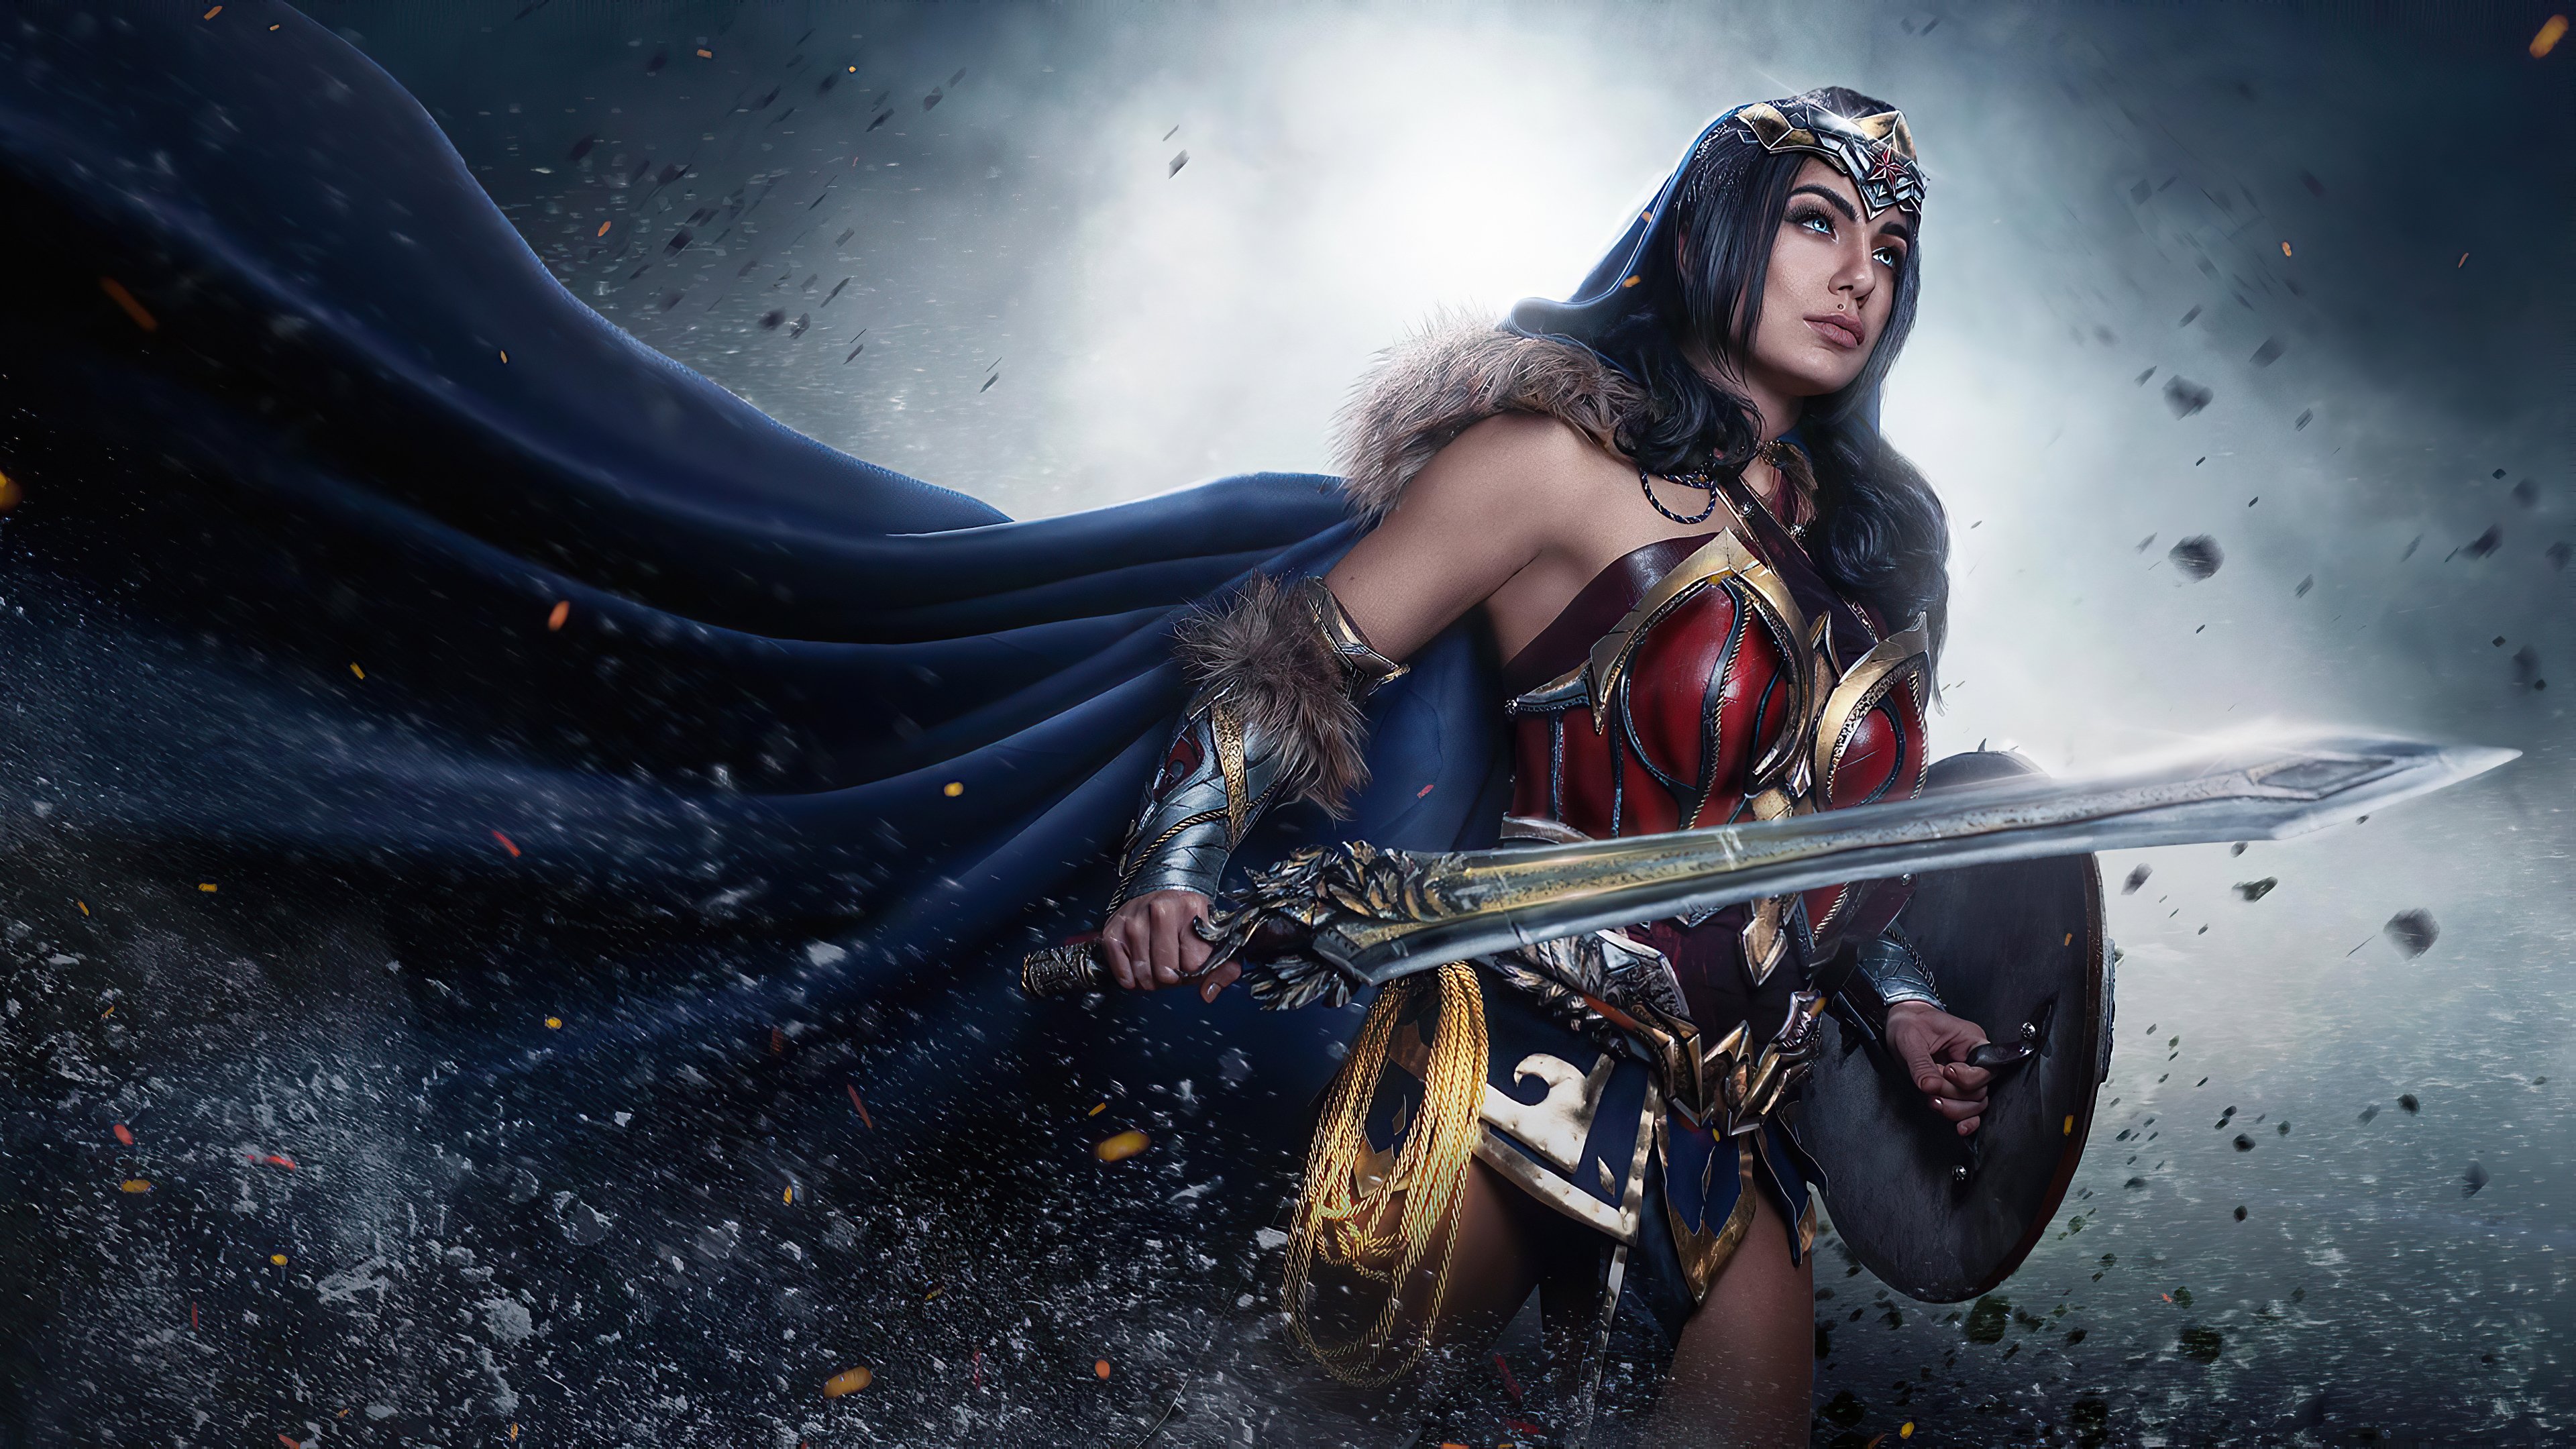 Wallpaper Wonder Woman with arms